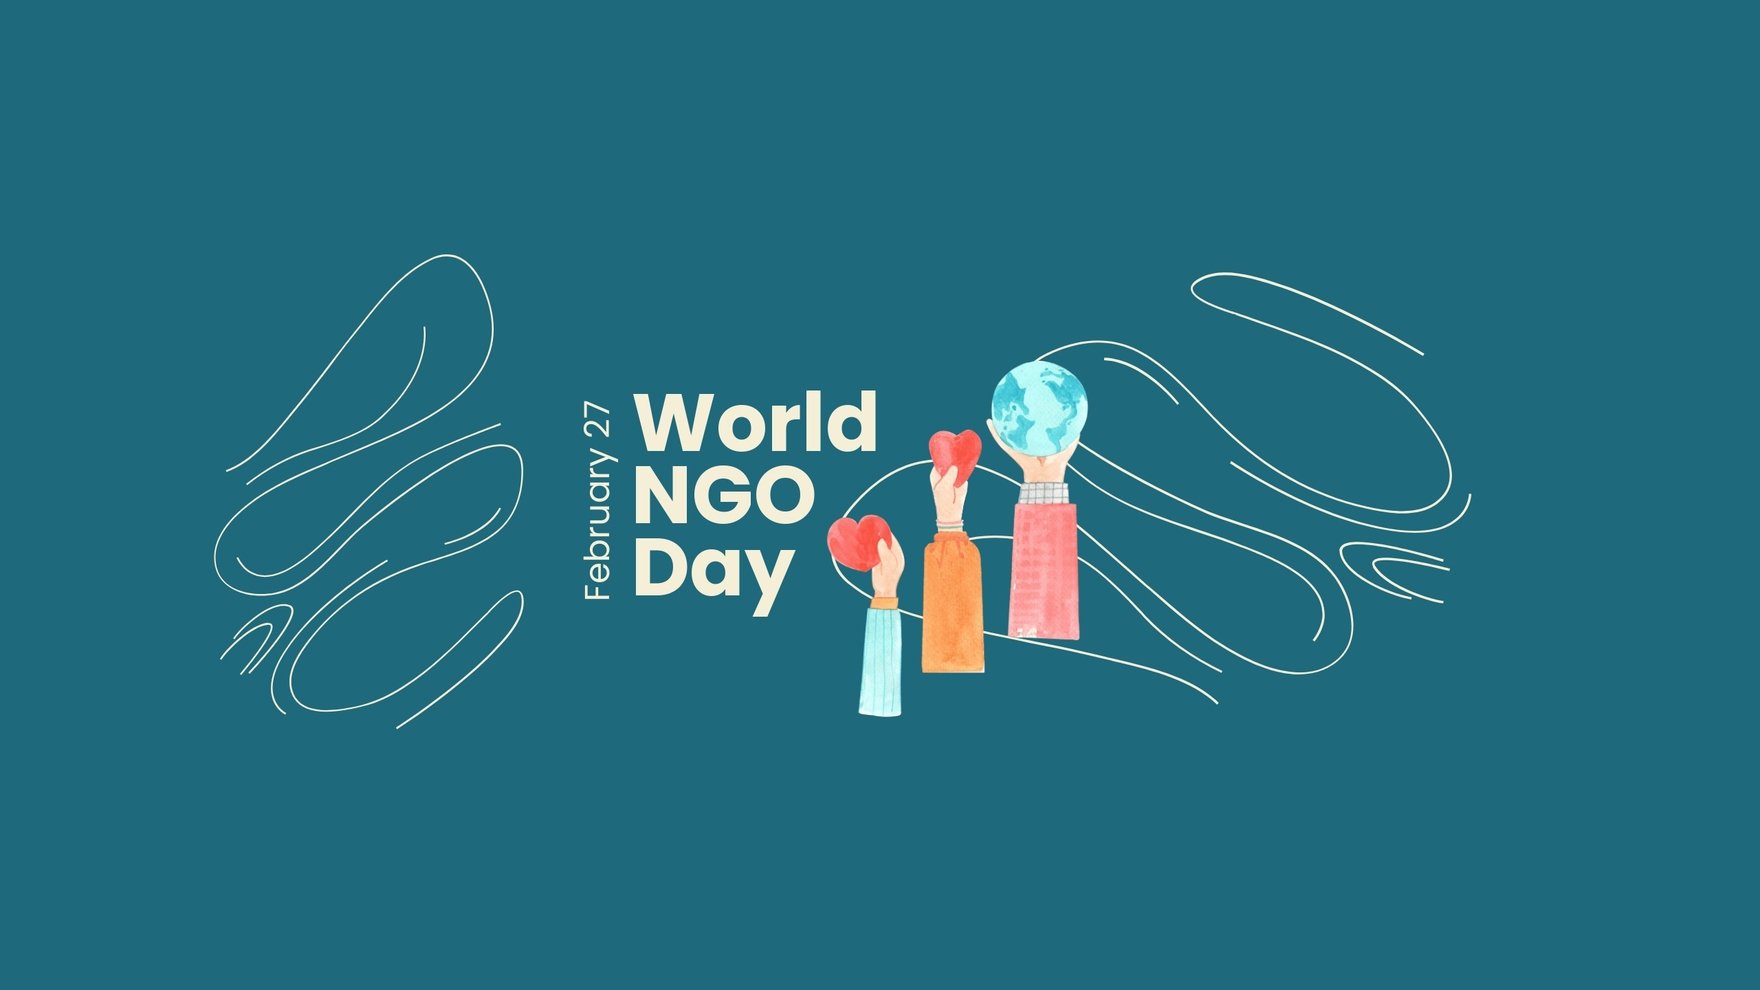 World NGO Day YouTube Banner Template